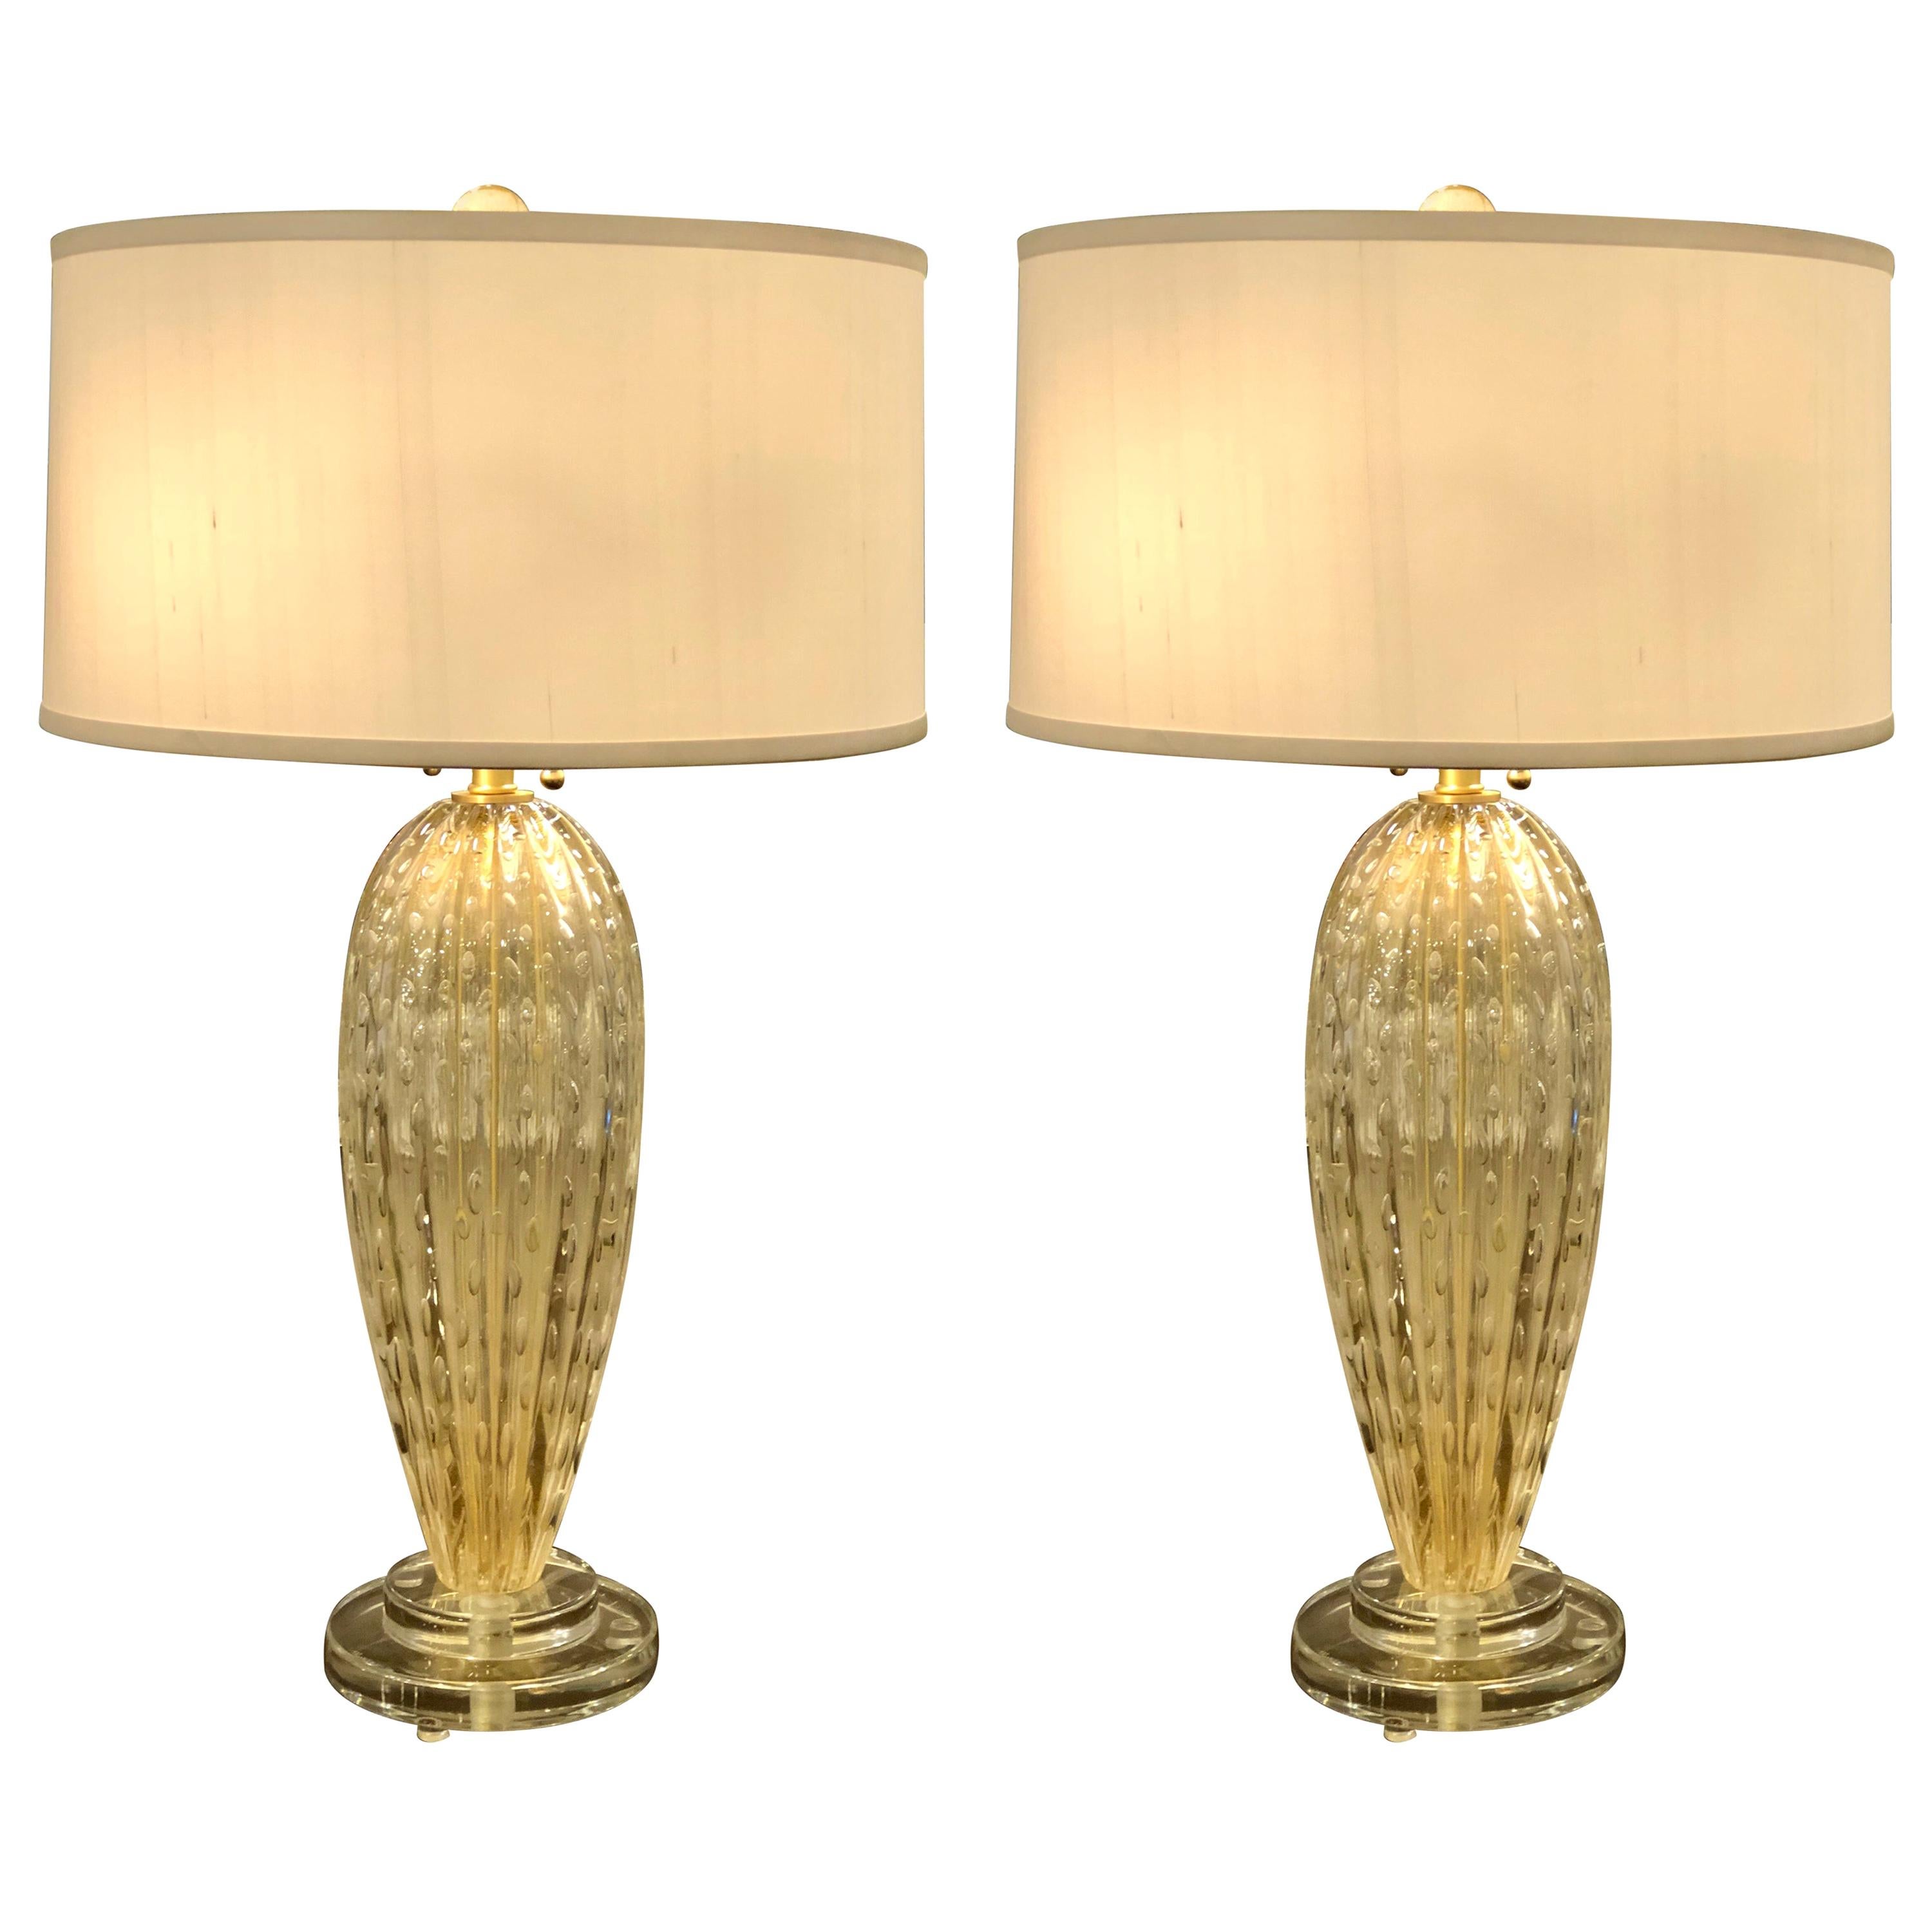 Italian Midcentury Style Clear & Gold Murano / Venetian Glass Table Lamps, Pair For Sale